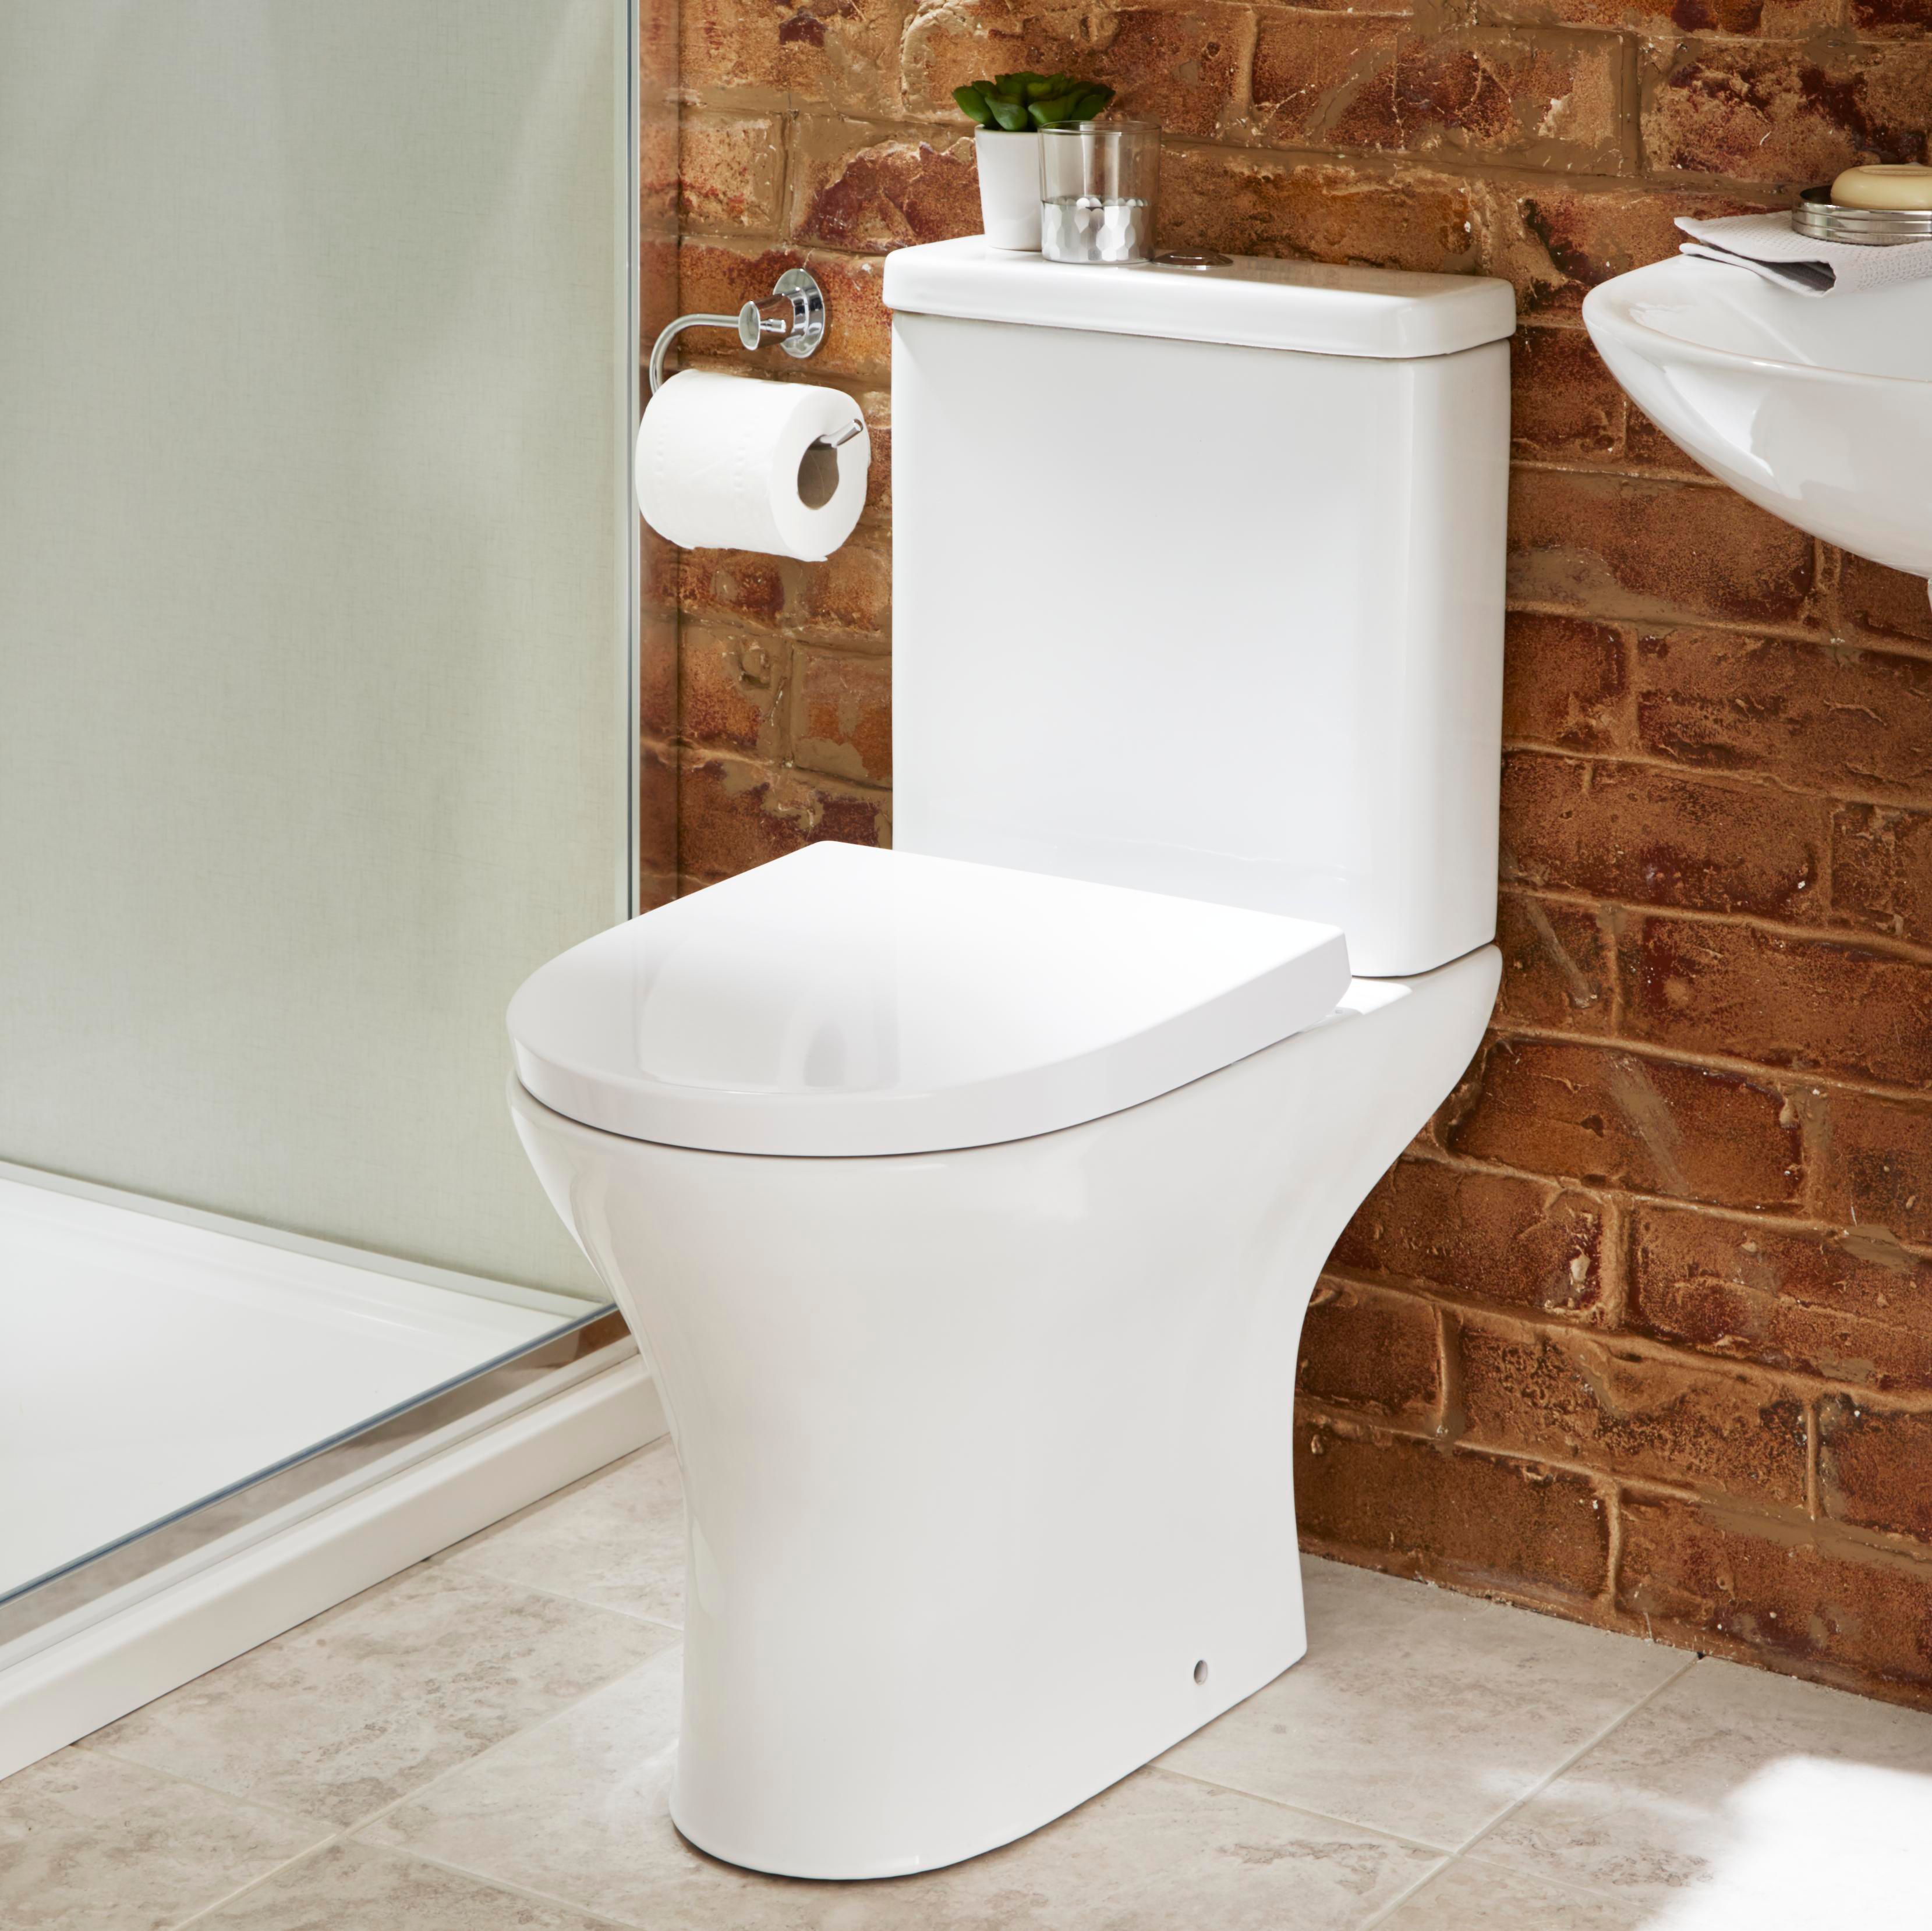 Cooke & Lewis Angelica Modern Close-coupled Toilet with Soft close Seat